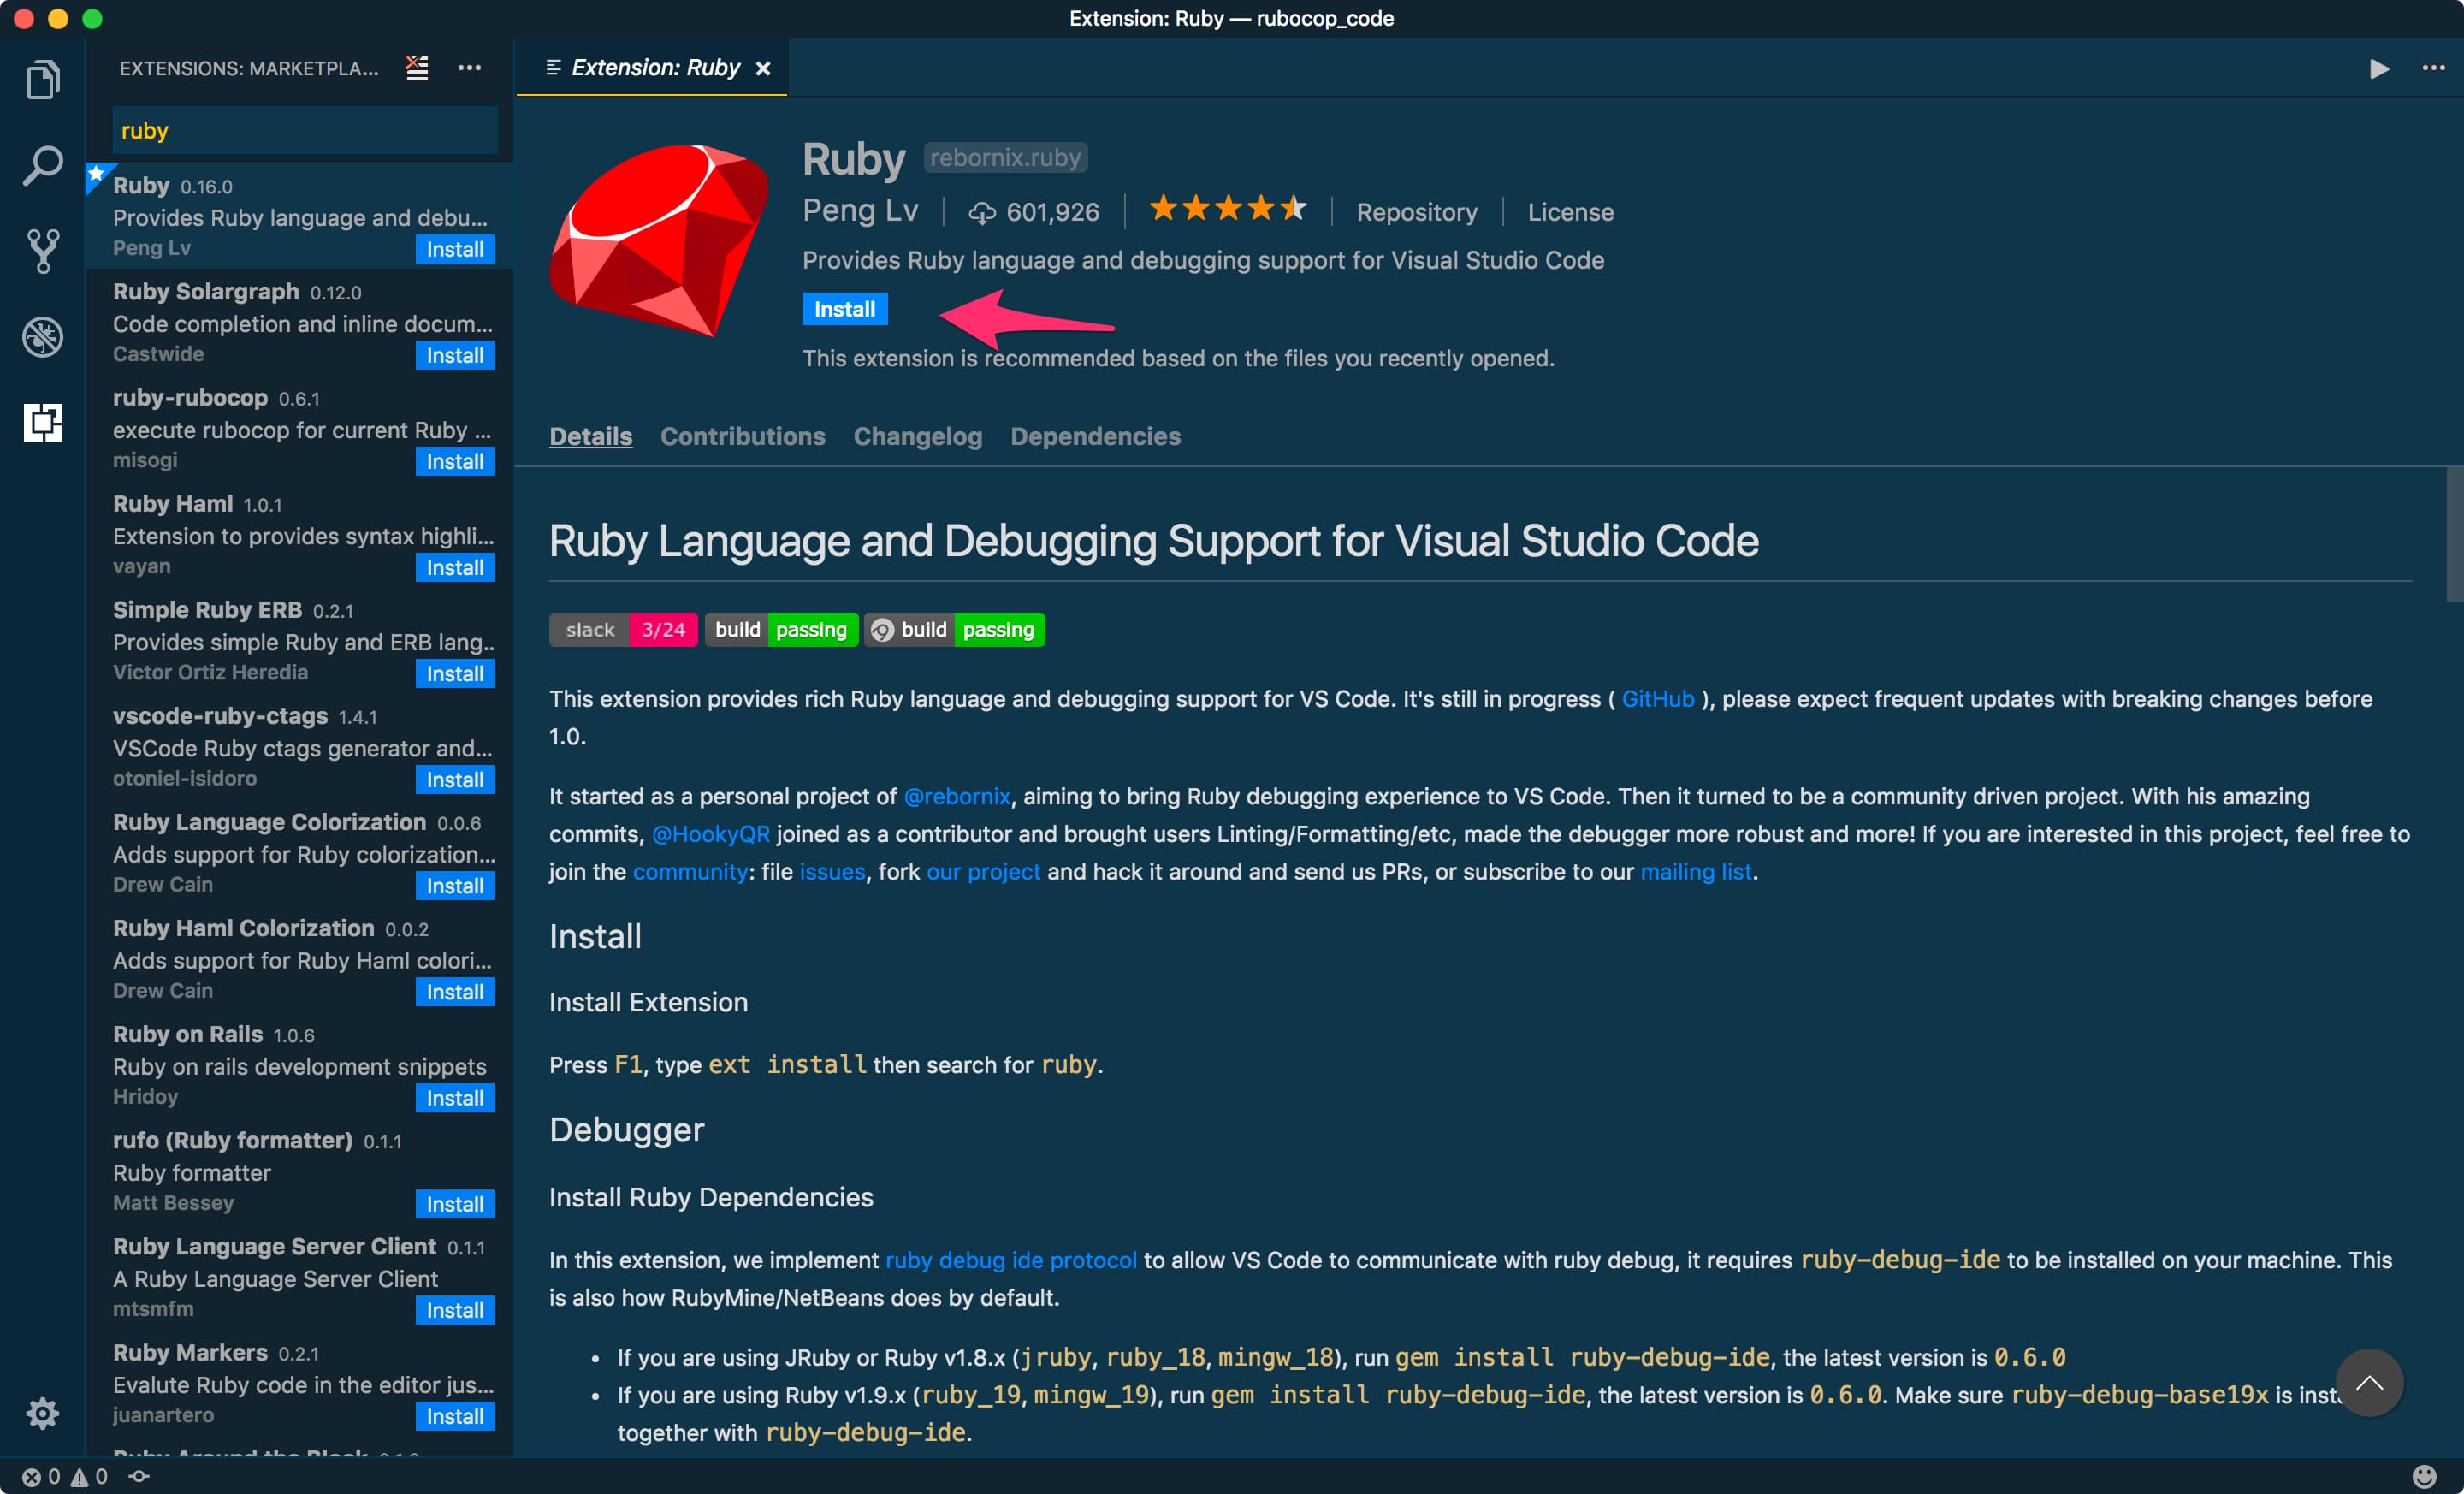 extension-ruby-vs-code